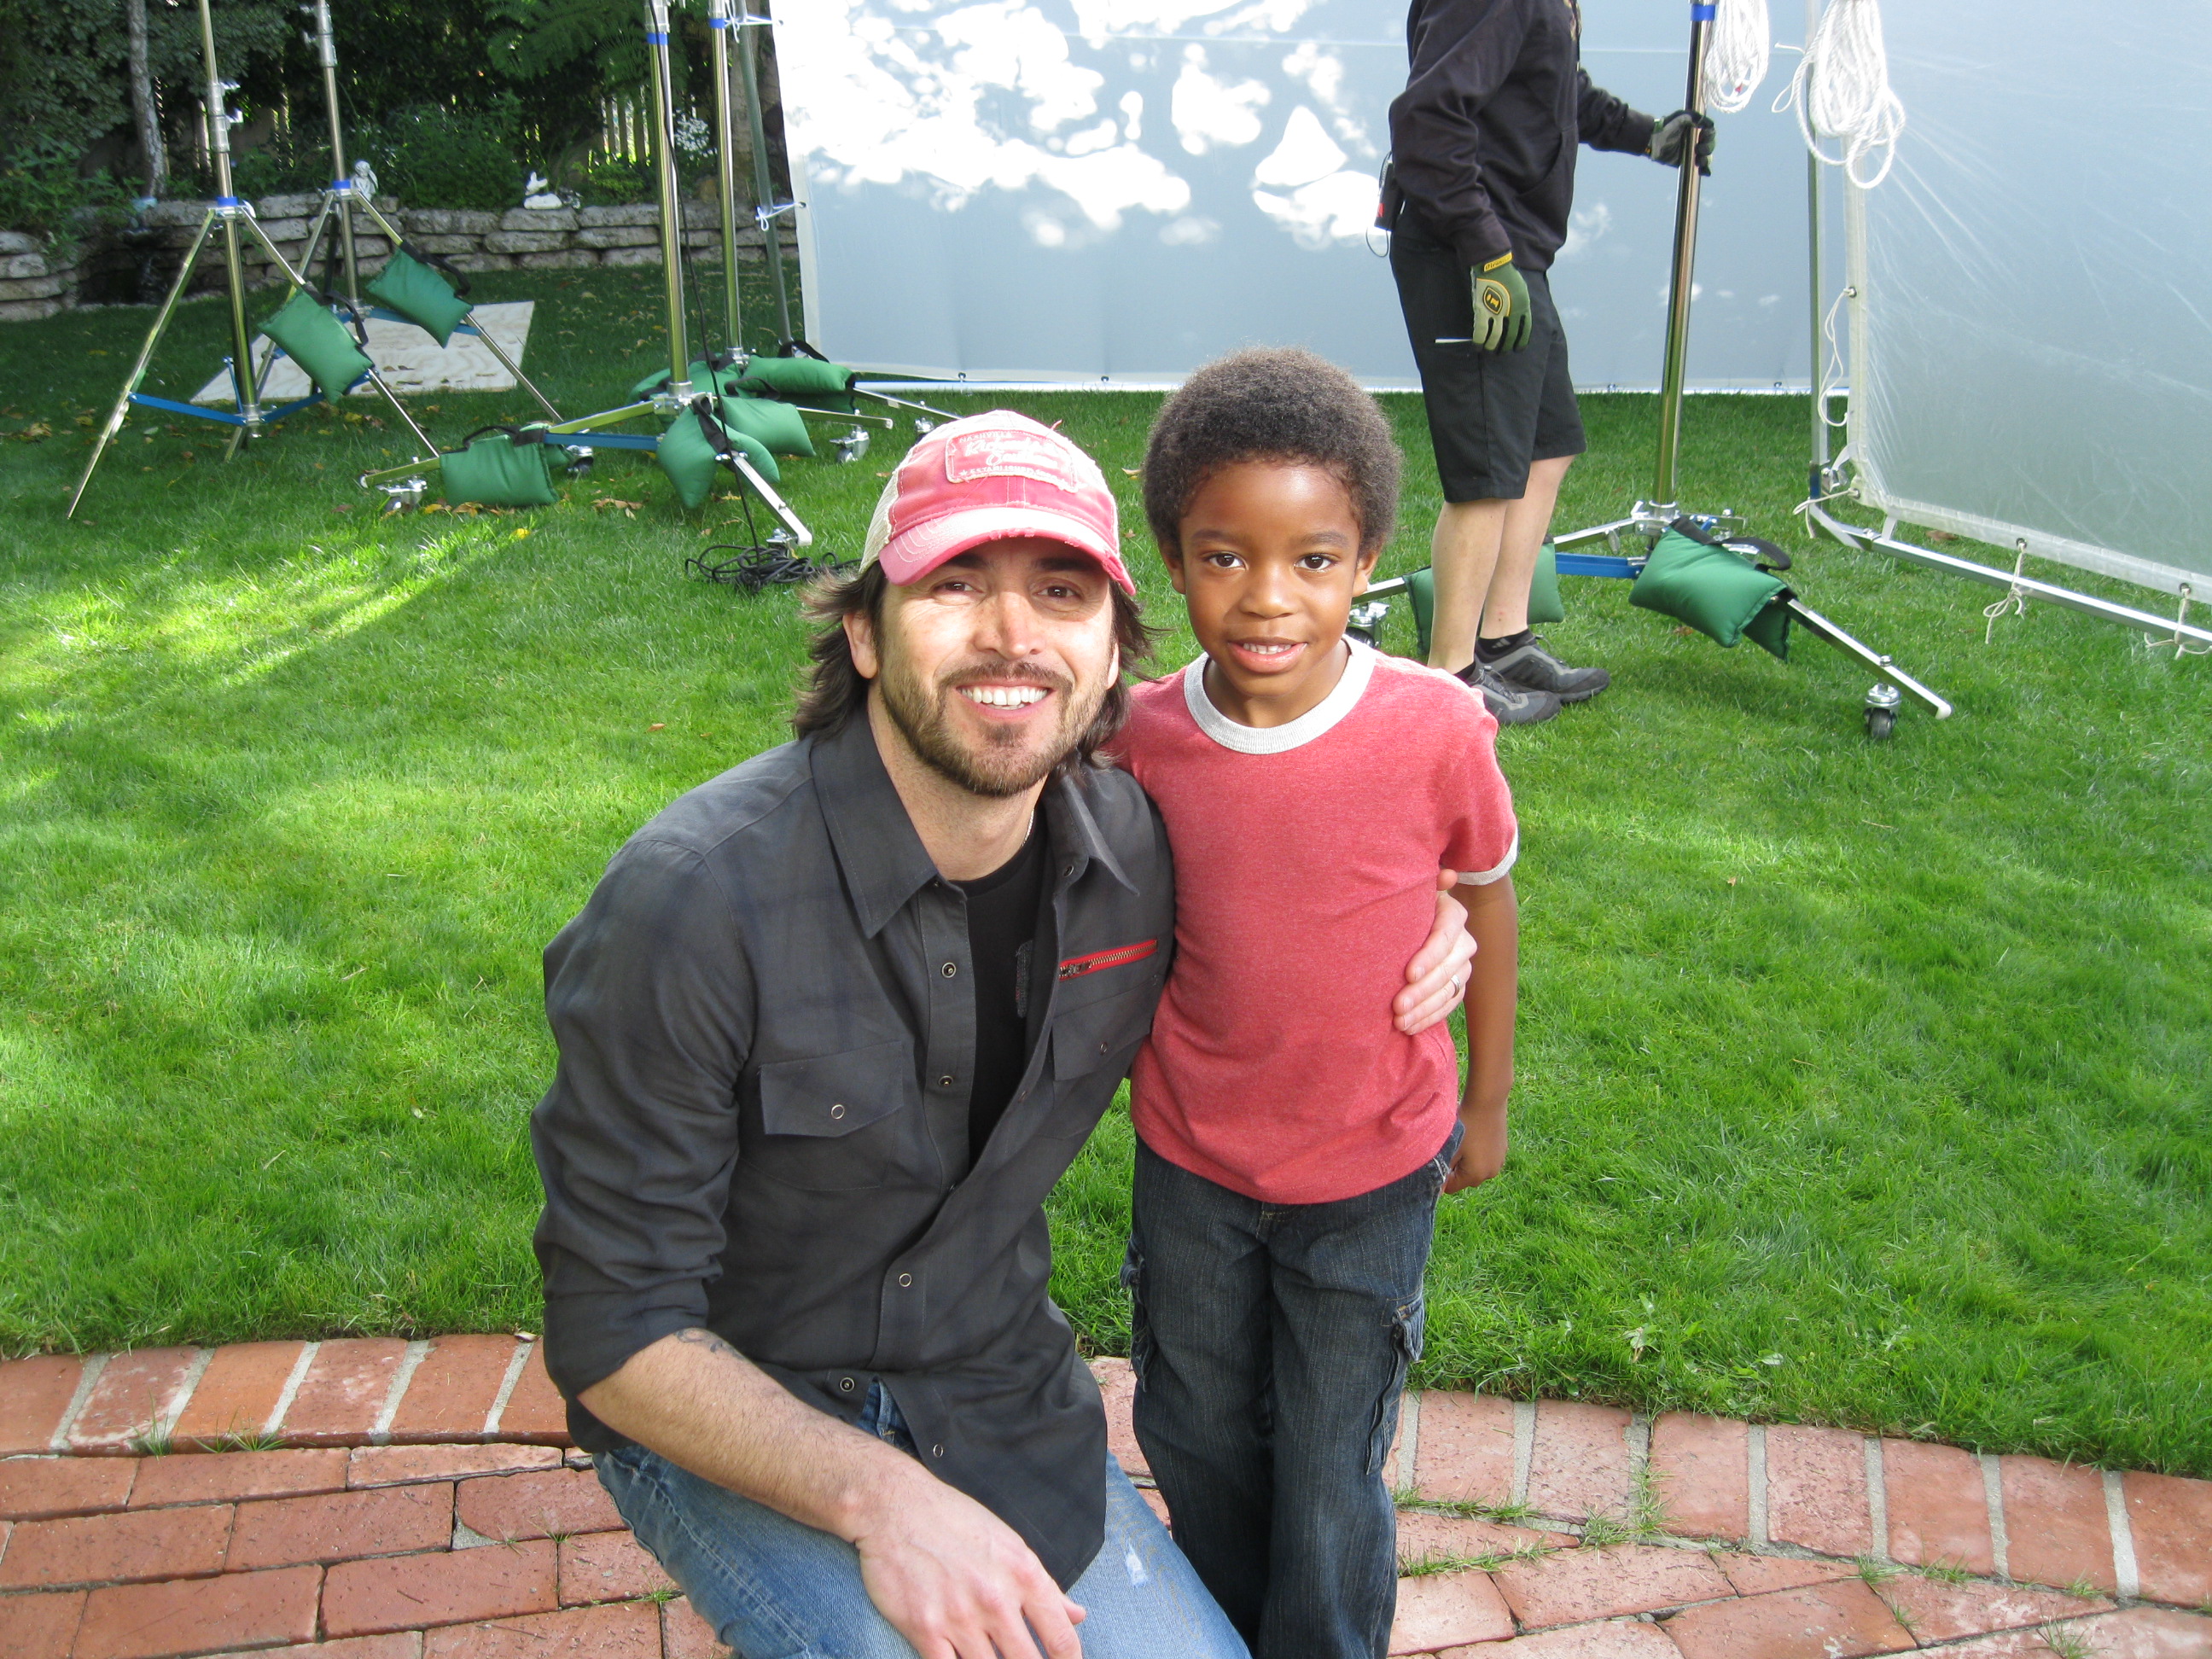 Alex with Director Shaun Silva on his Weber Grill commercial shoot.